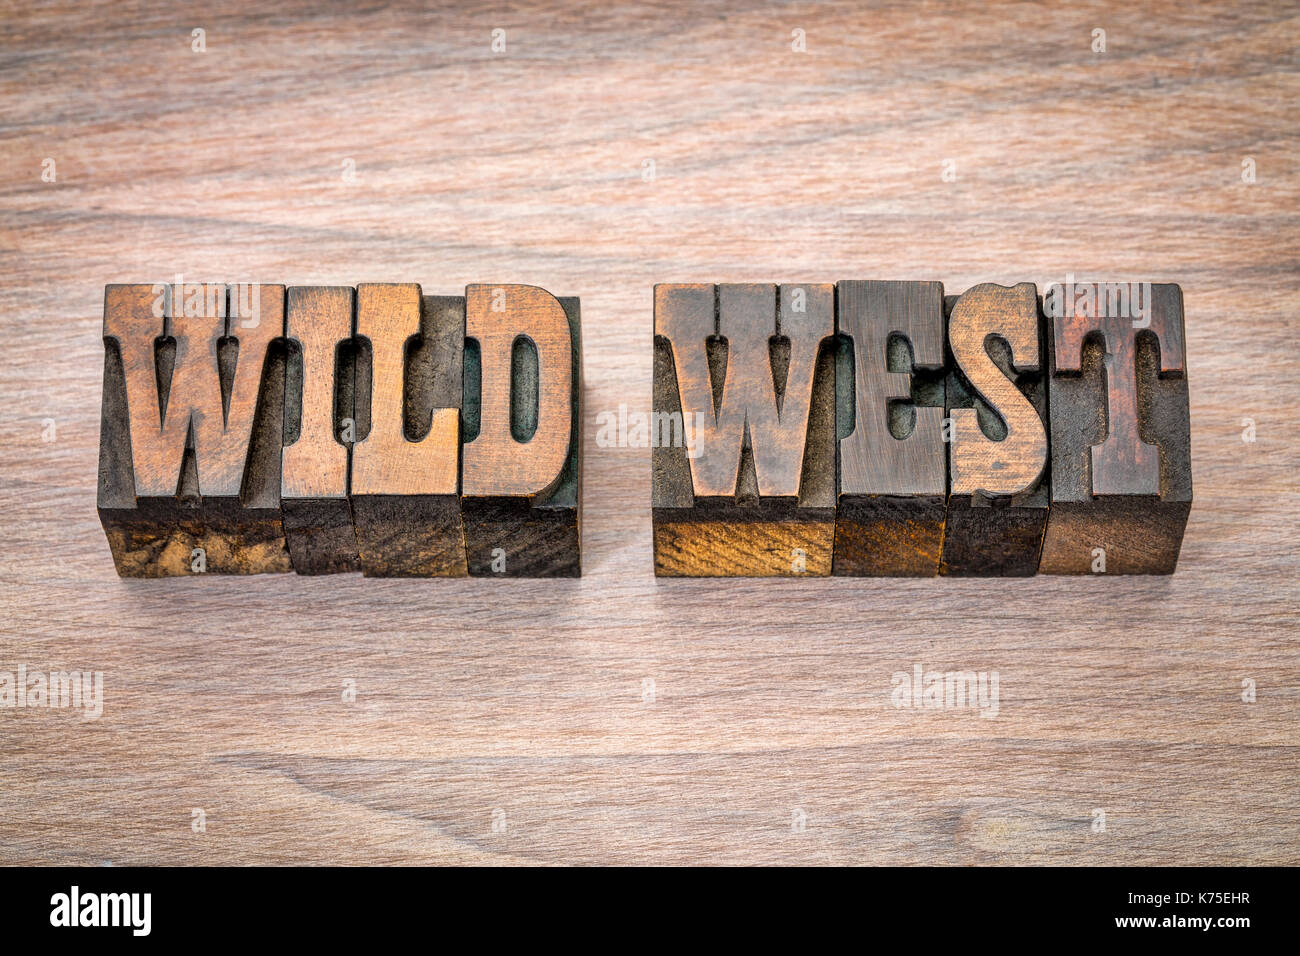 wild west banner - text in vintage letterpress wood type - French Clarendon font popular in western movies and memorabilia Stock Photo